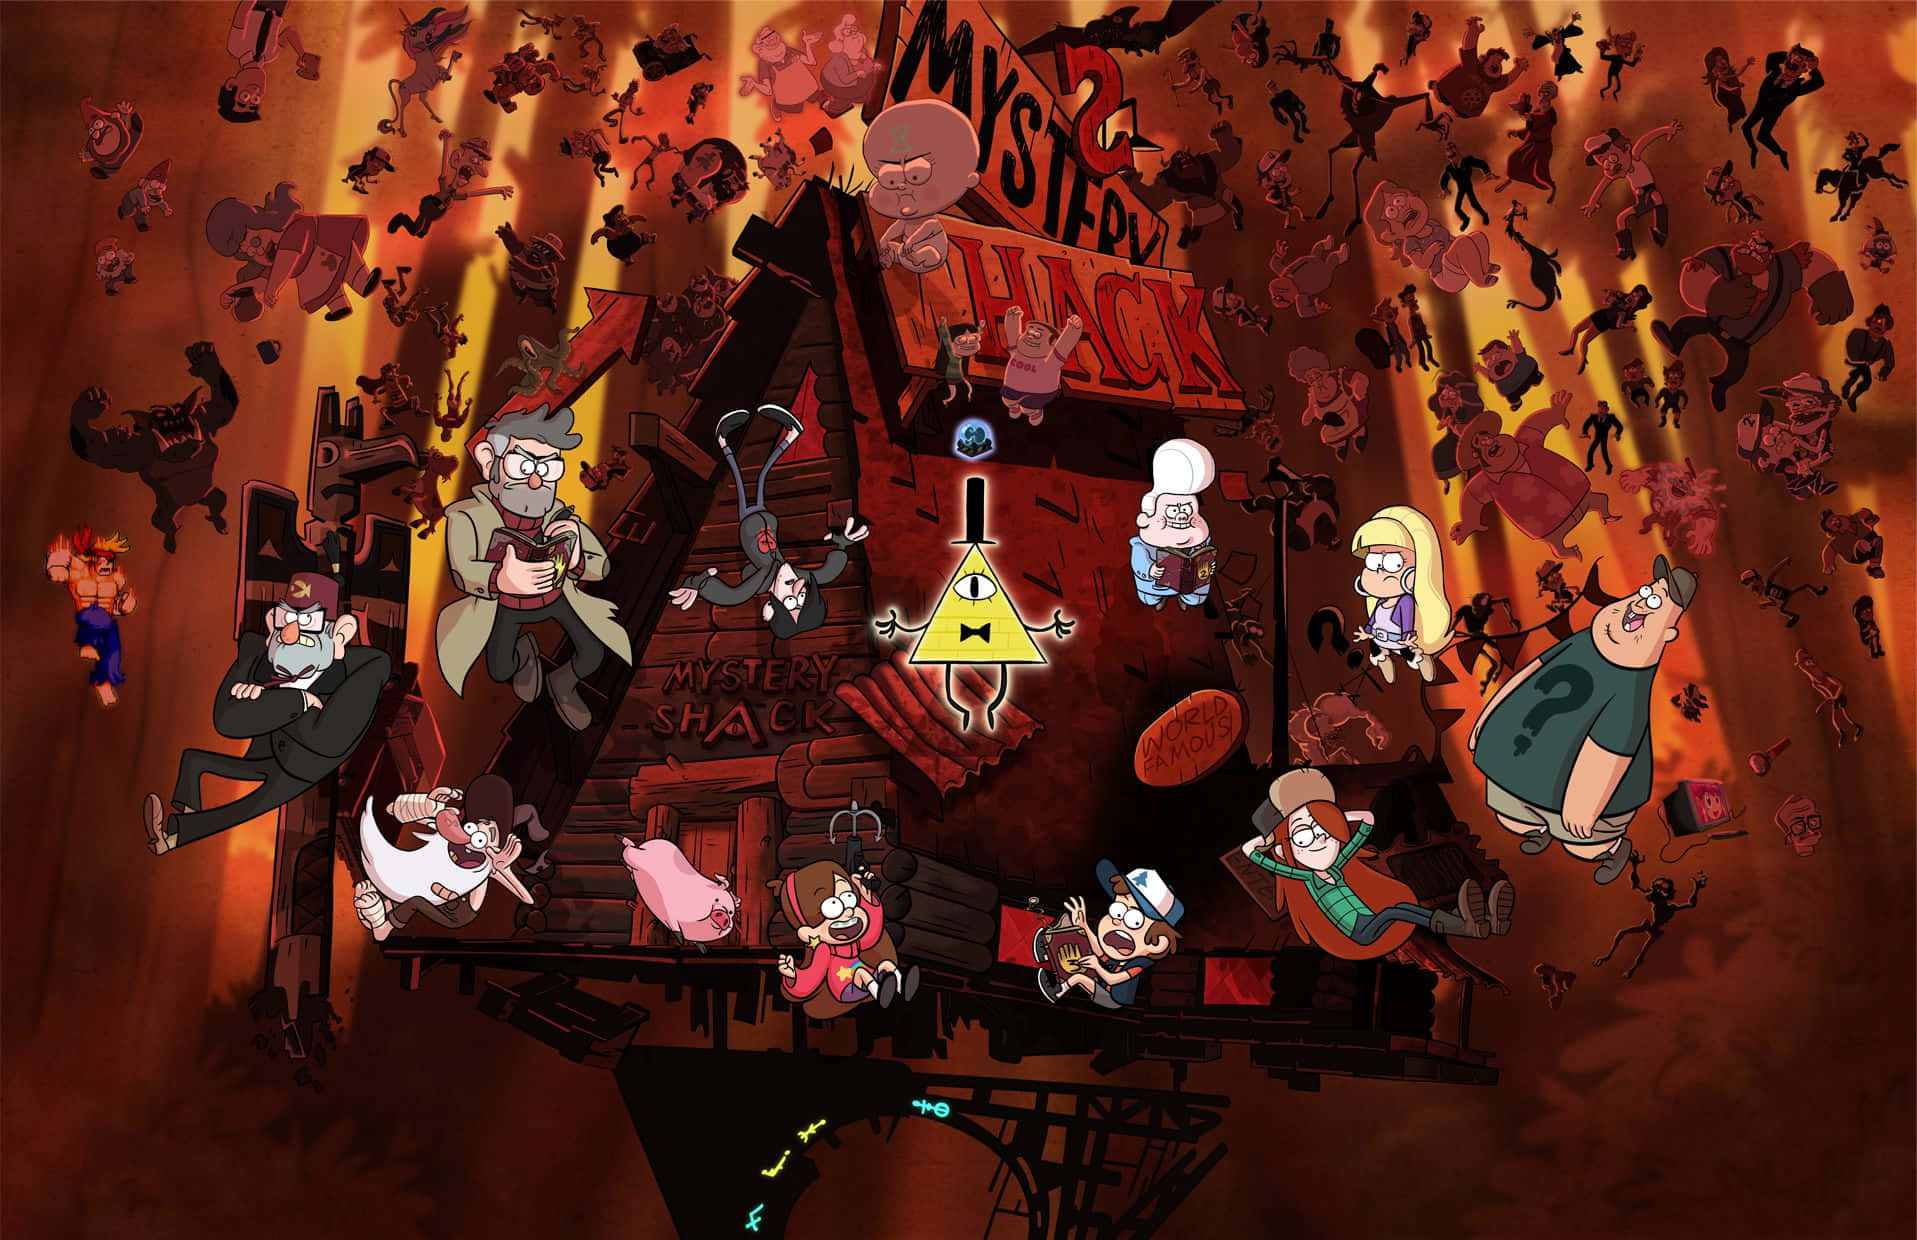 Pining for Adventure in the Unexplored World of Gravity Falls